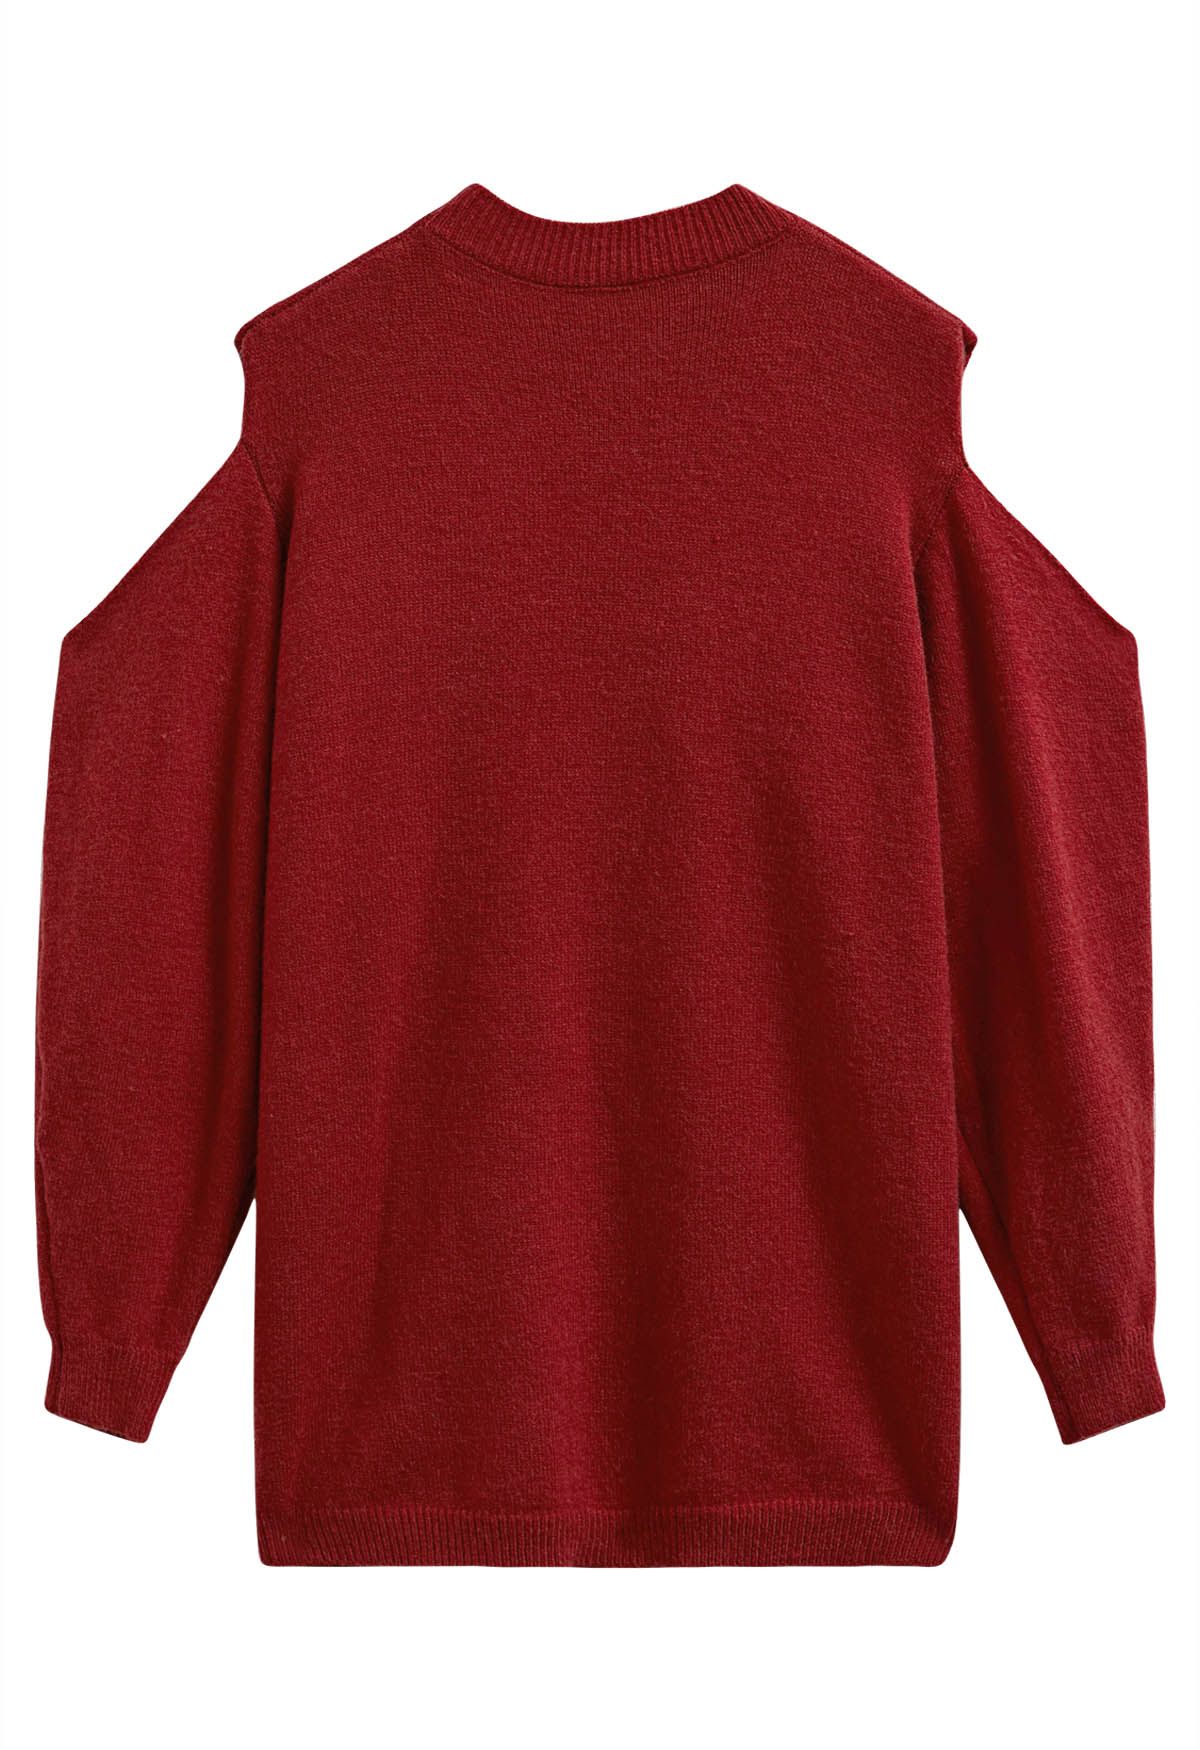 Bowknot Cold-Shoulder Knit Sweater in Red